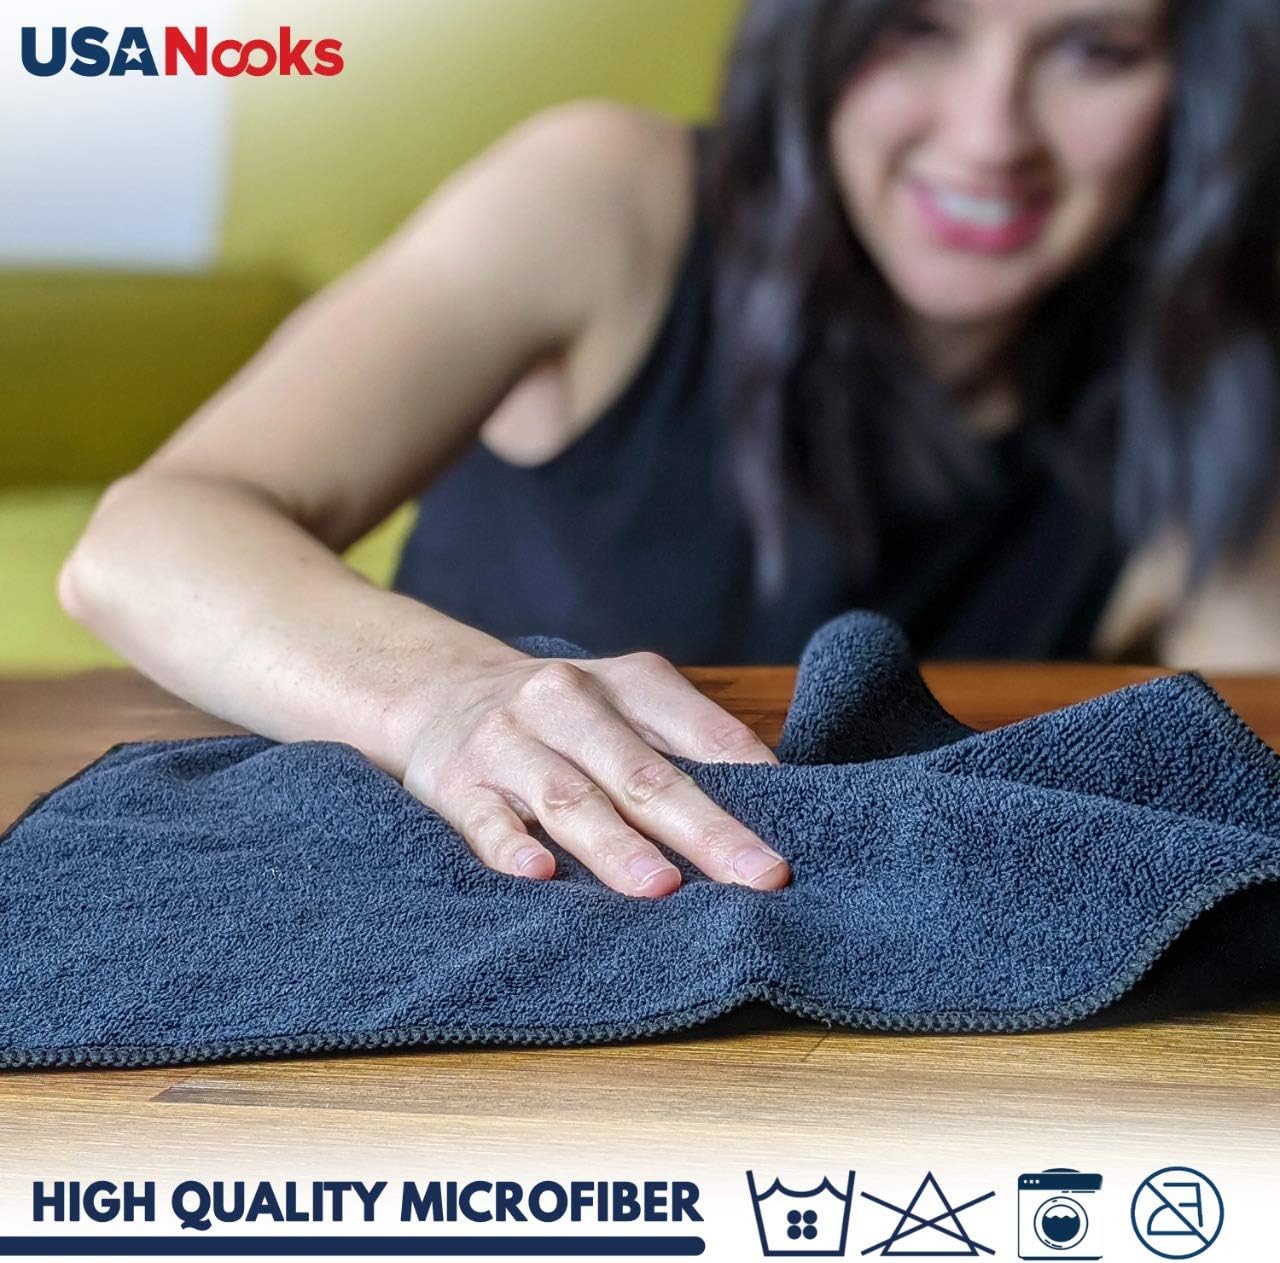 USANOOKS Microfiber Cleaning Cloth Grey - 12 Packs 12.6"x12.6" - High Performance - 1200 Washes, Ultra Absorbent Towels Weave Grime & Liquid for Streak-Free Mirror Shine - Car Washing Cloth